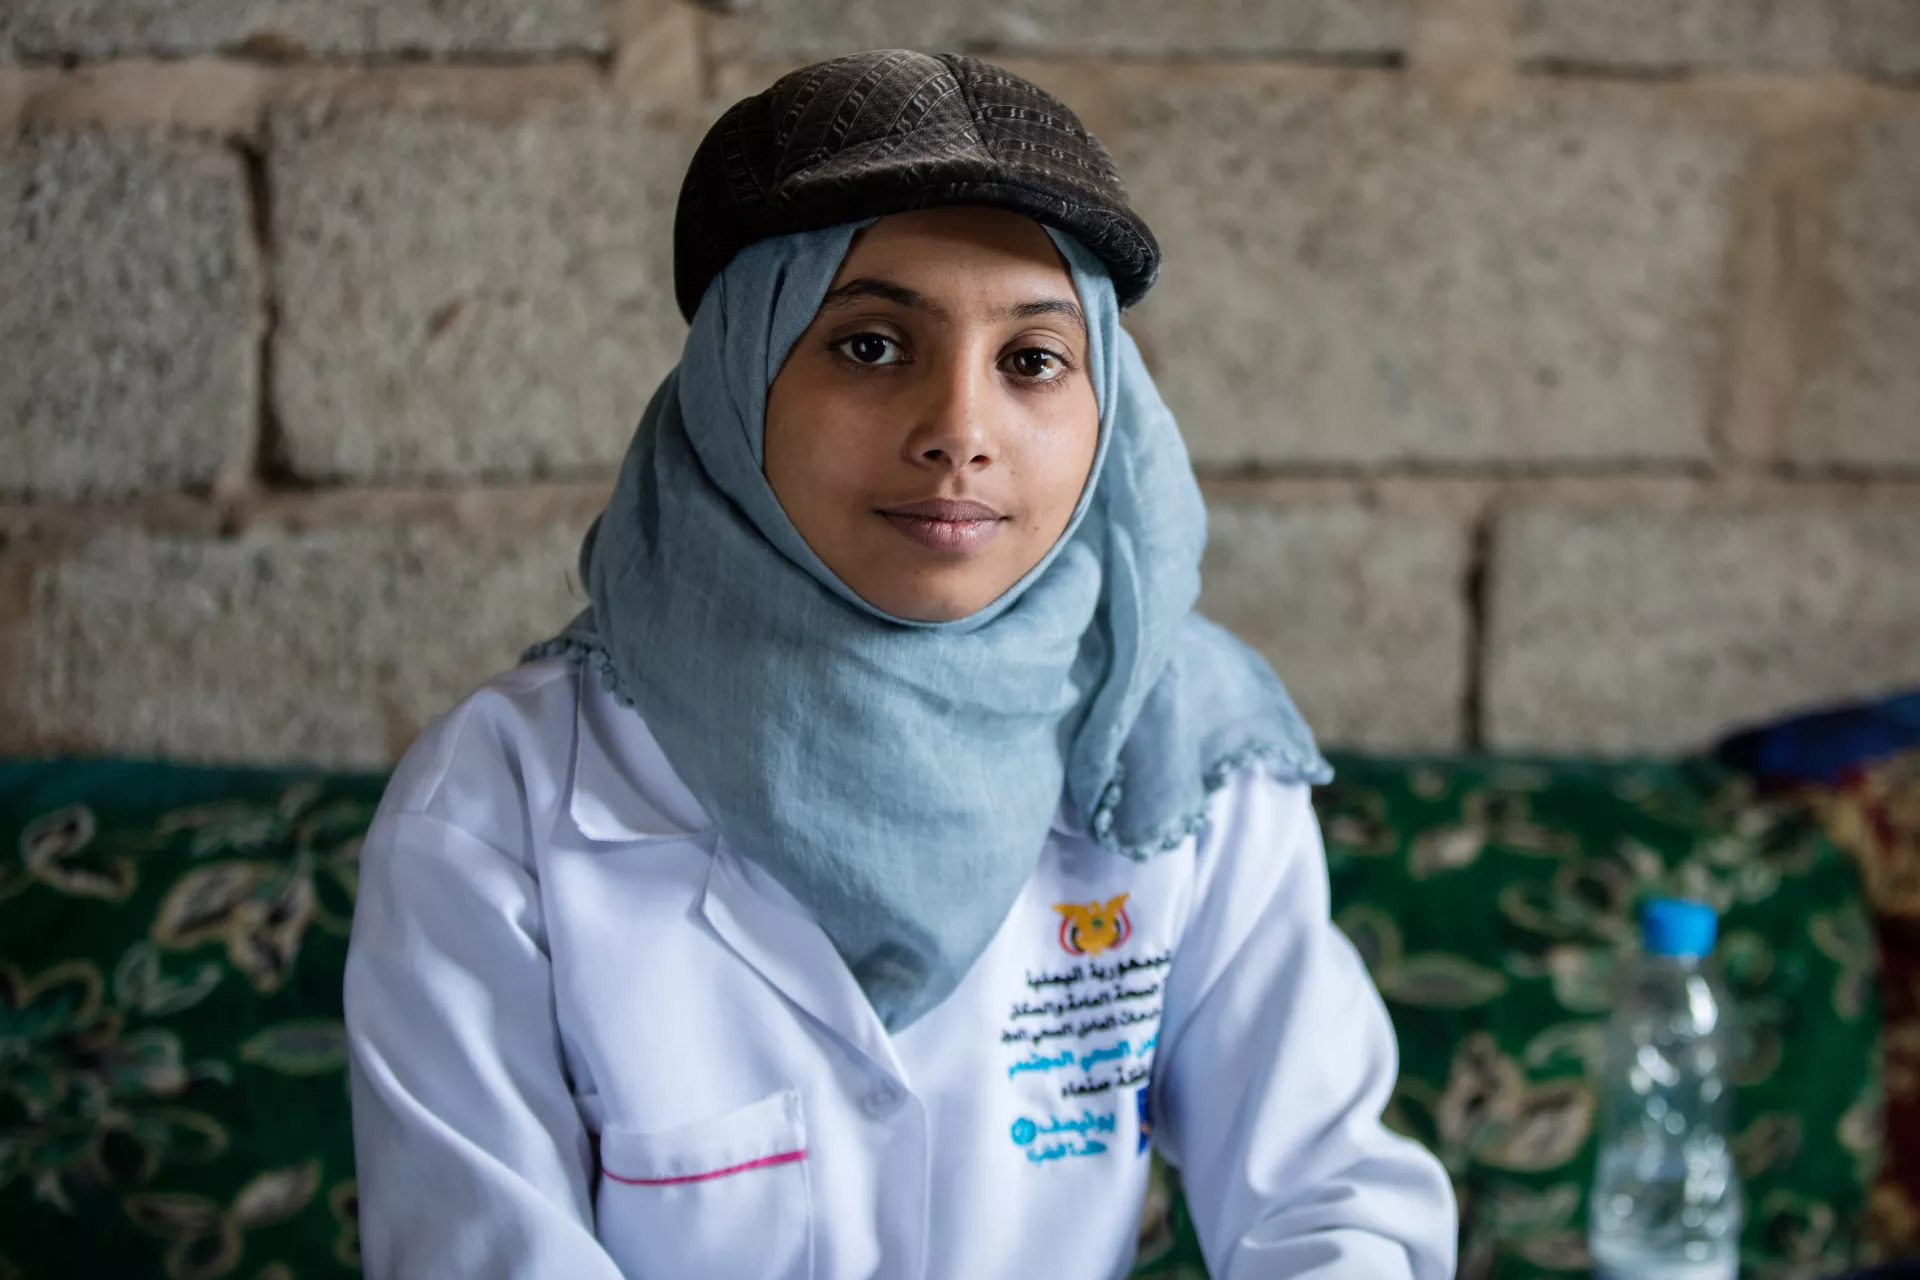 An adolescent community health worker in her medical jacket poses for a photo.